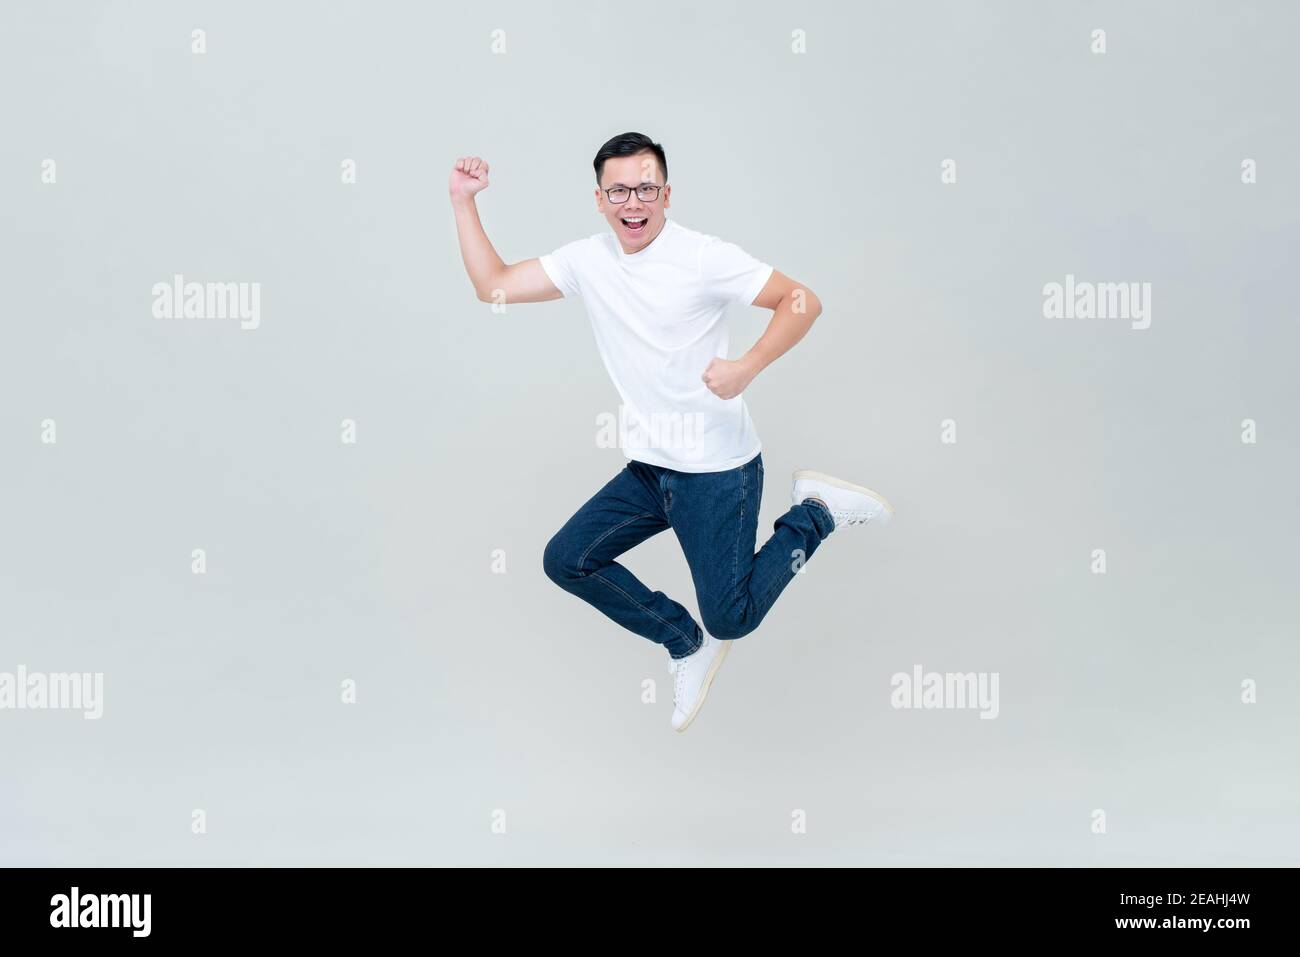 Energetic Asian man in casual white t-shirt and jeans jumping on light gray background Stock Photo